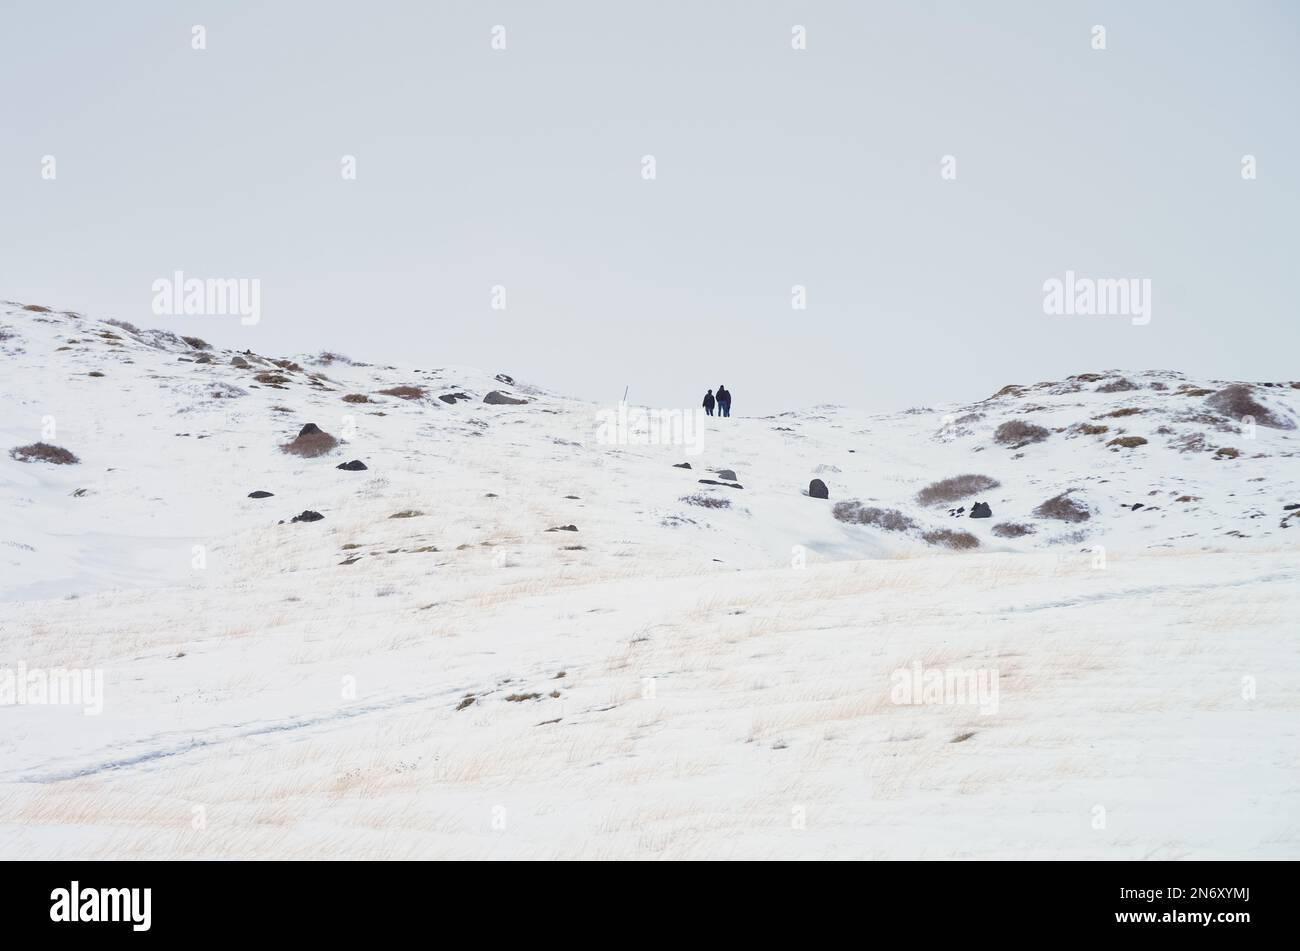 minimalist photography of a mountain snow covered landscape with people silhouette at the edge on the 'Valle del Bove' along the path on the 'Schiena Stock Photo